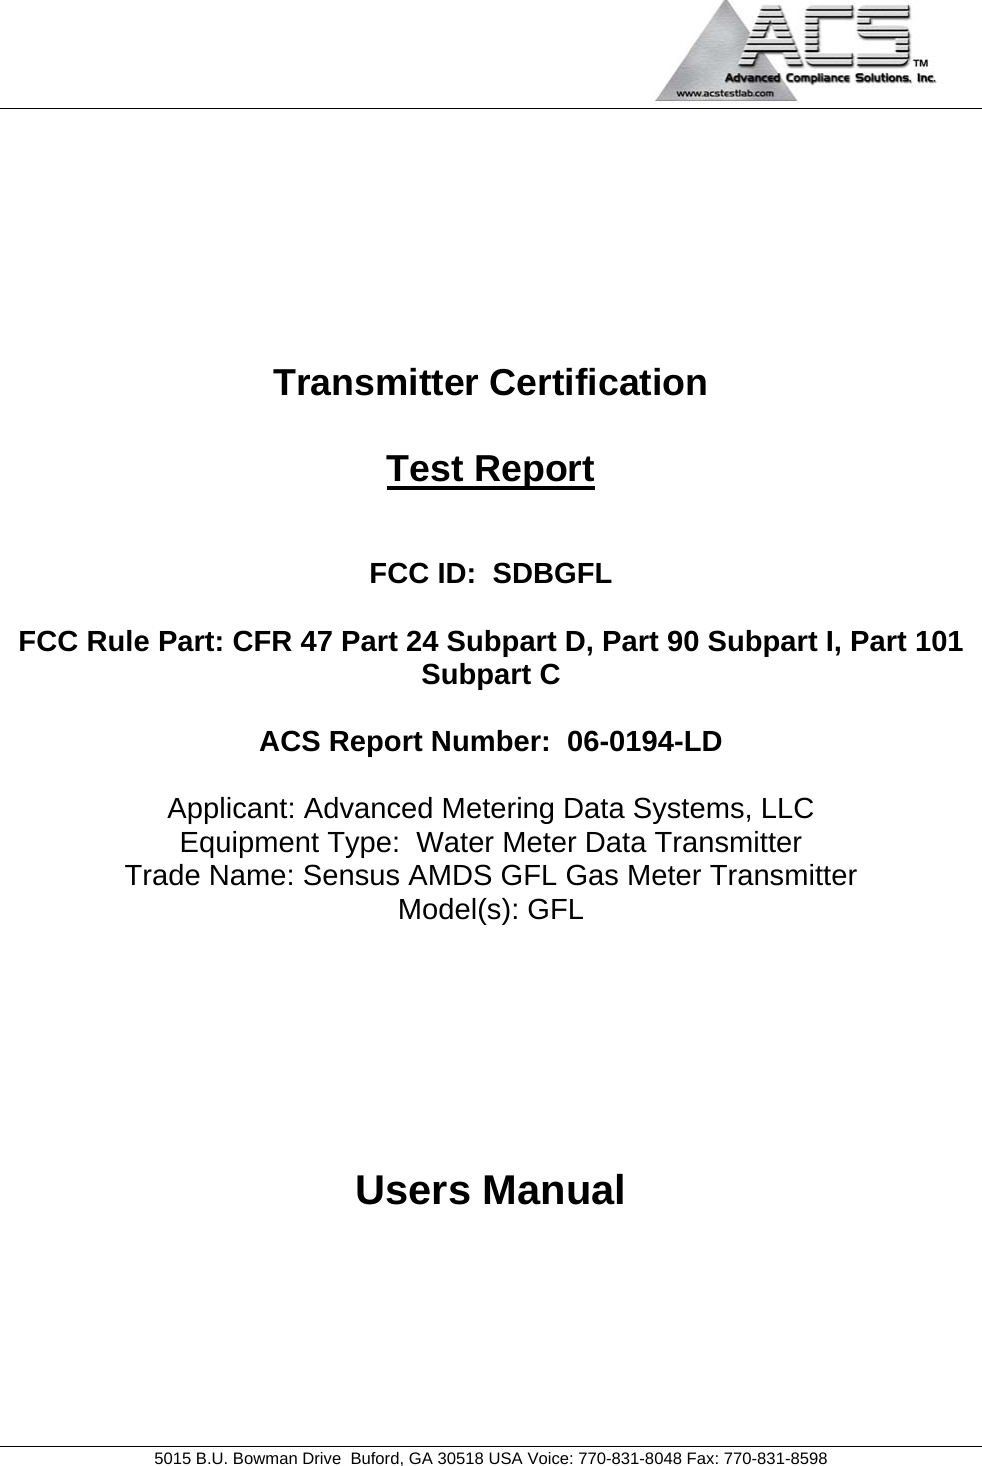                                            5015 B.U. Bowman Drive  Buford, GA 30518 USA Voice: 770-831-8048 Fax: 770-831-8598   Transmitter Certification  Test Report   FCC ID:  SDBGFL  FCC Rule Part: CFR 47 Part 24 Subpart D, Part 90 Subpart I, Part 101 Subpart C  ACS Report Number:  06-0194-LD   Applicant: Advanced Metering Data Systems, LLC Equipment Type:  Water Meter Data Transmitter Trade Name: Sensus AMDS GFL Gas Meter Transmitter Model(s): GFL      Users Manual 